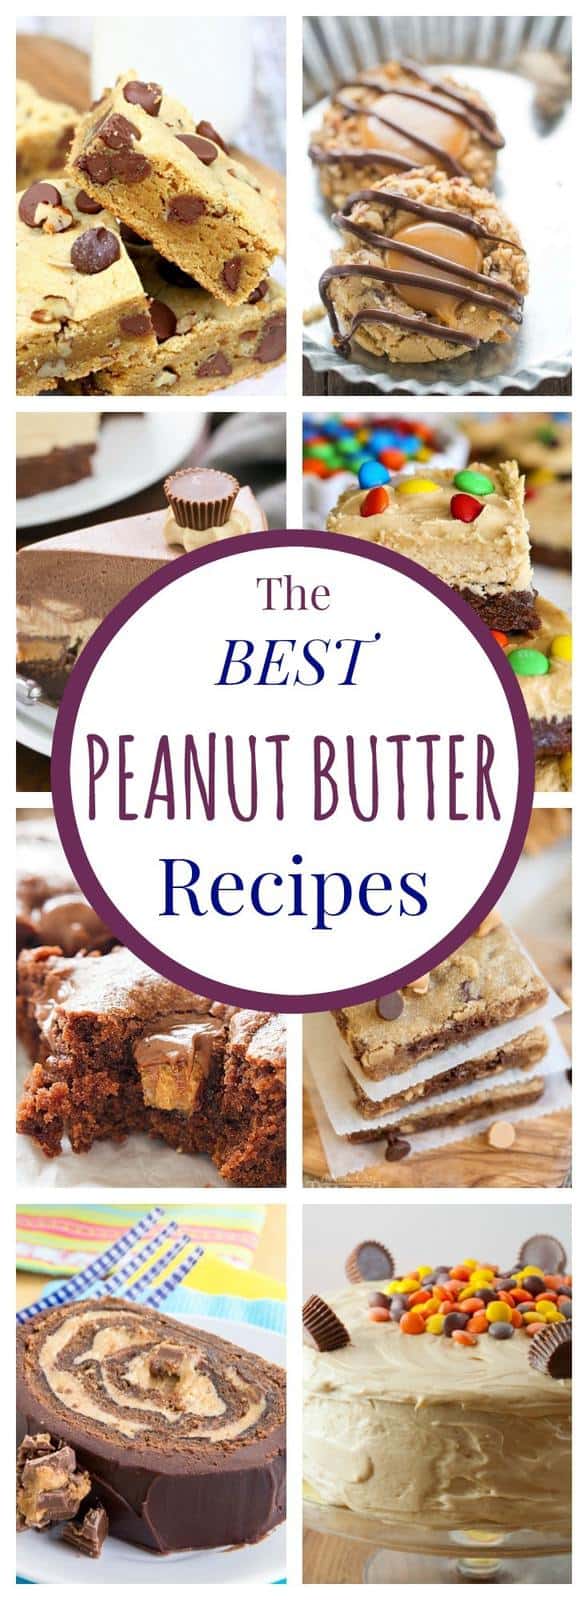 Over 30 of the Best Peanut Butter Recipes - cookies, bars, cakes, snacks, even some dinner recipes!